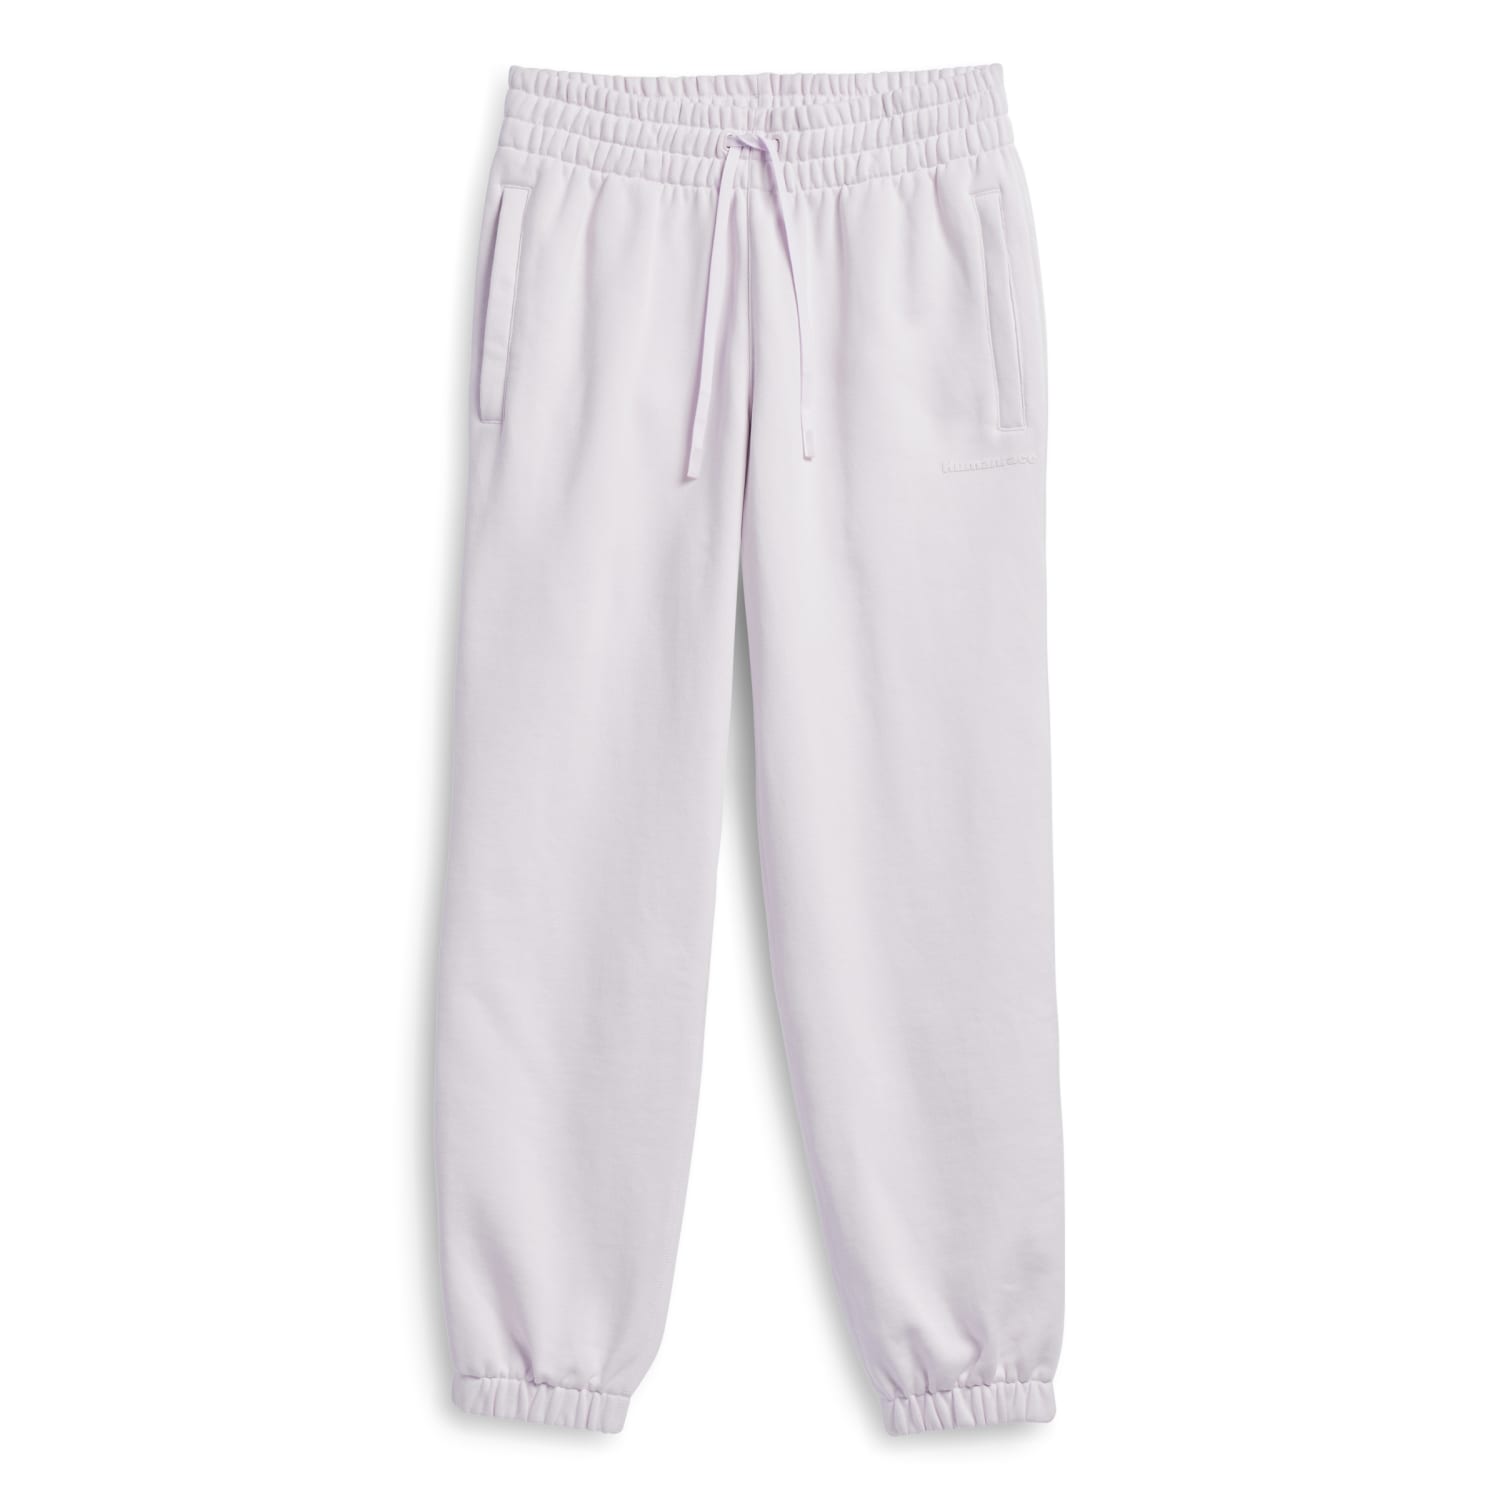 Adidas Unisex PW Basics Pant Almost Pink HS4844 - BOTTOMS - Canada